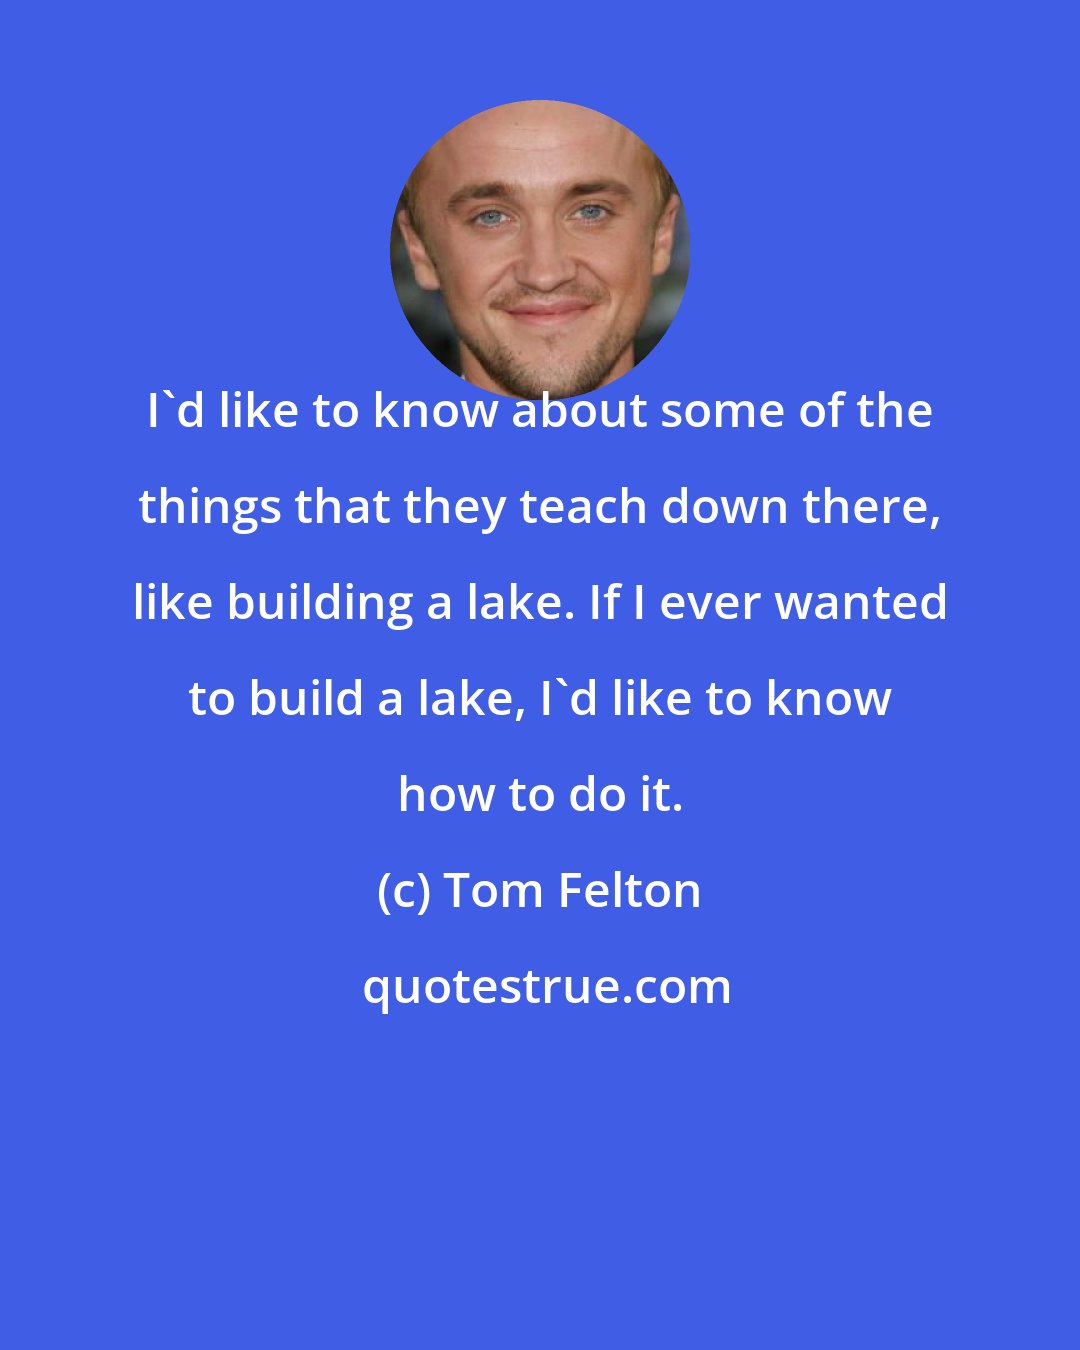 Tom Felton: I'd like to know about some of the things that they teach down there, like building a lake. If I ever wanted to build a lake, I'd like to know how to do it.